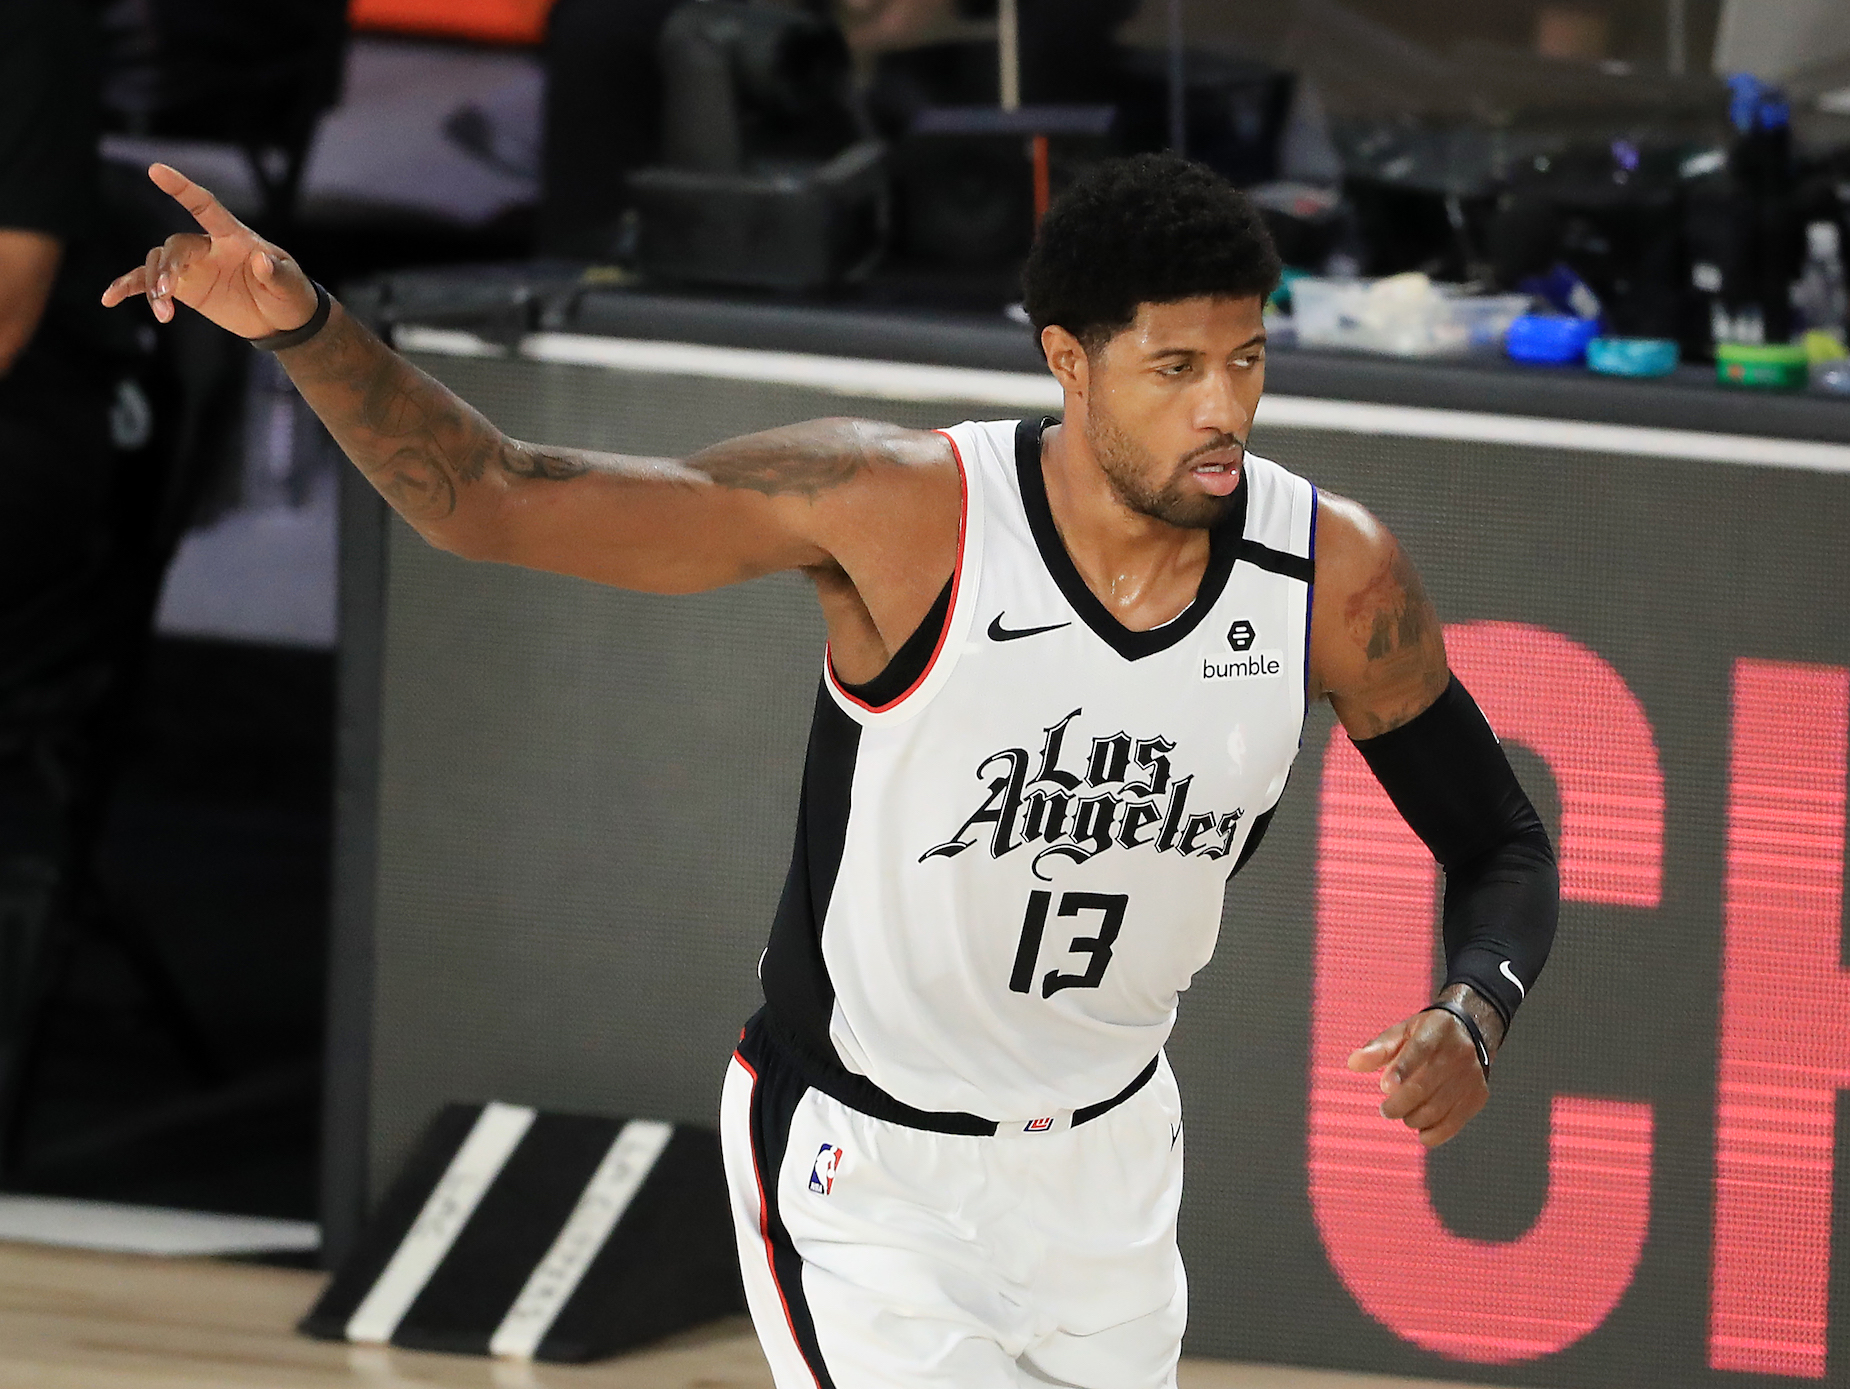 After the Los Angeles Clippers' elimination, Paul George believes that the team needs to simply spend more time together.